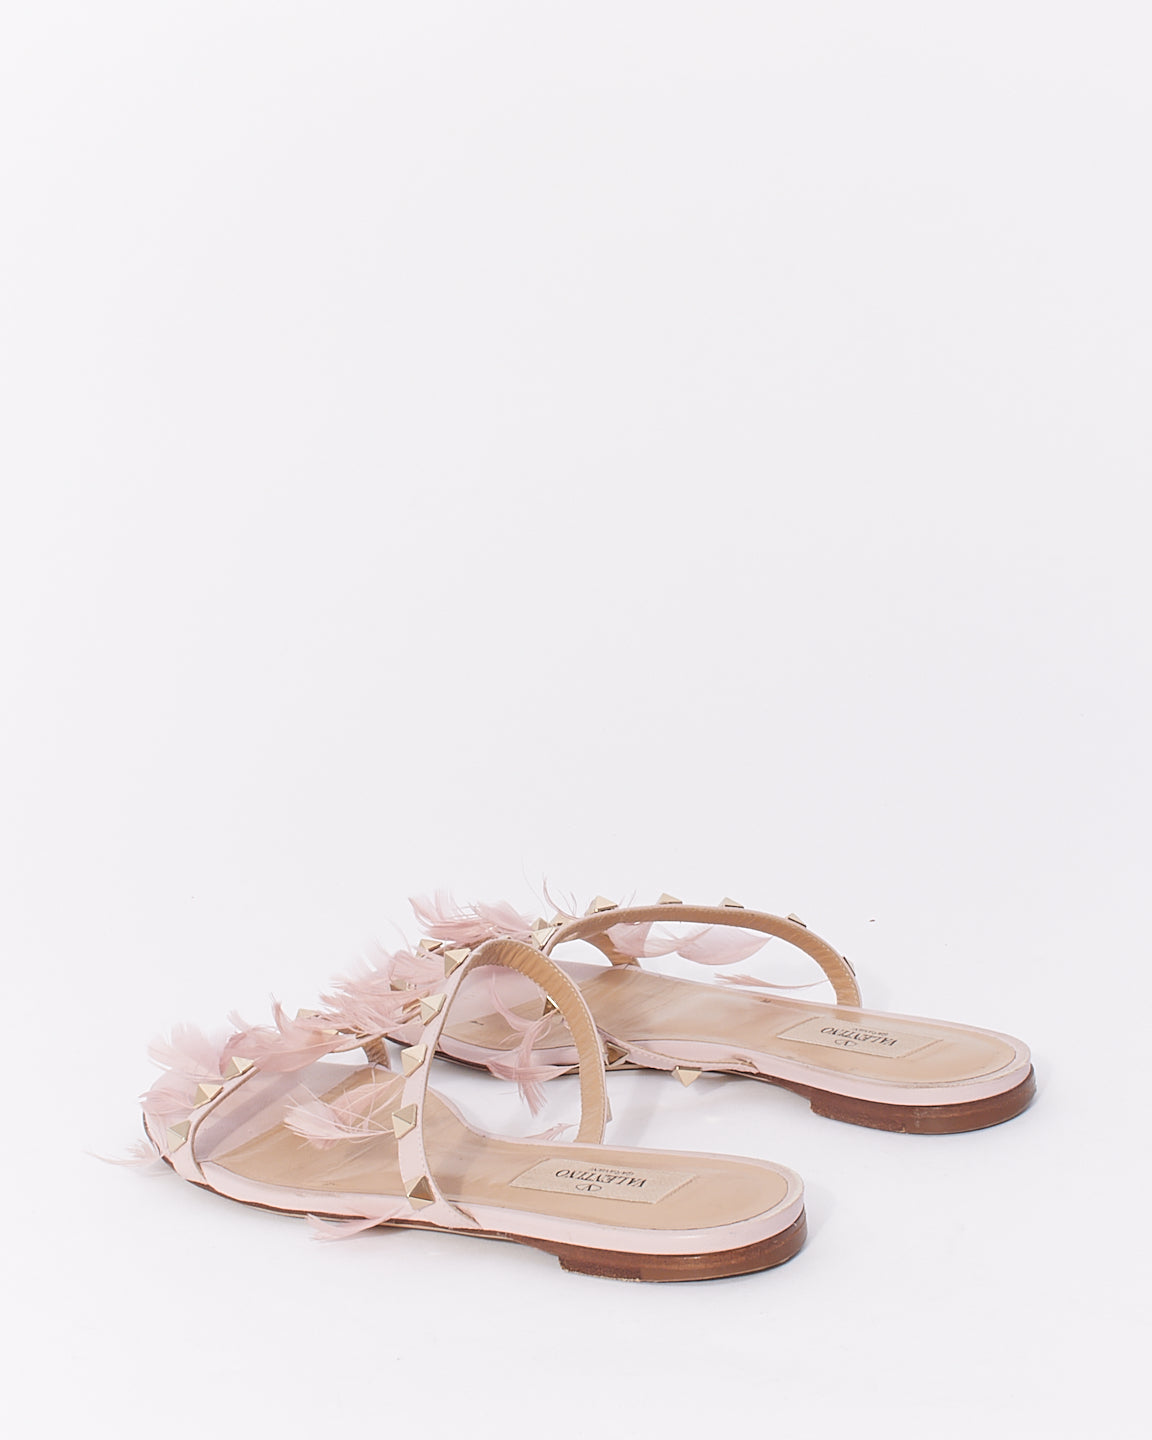 Valentino Pink Rockstud Sandals with Feathers - 37